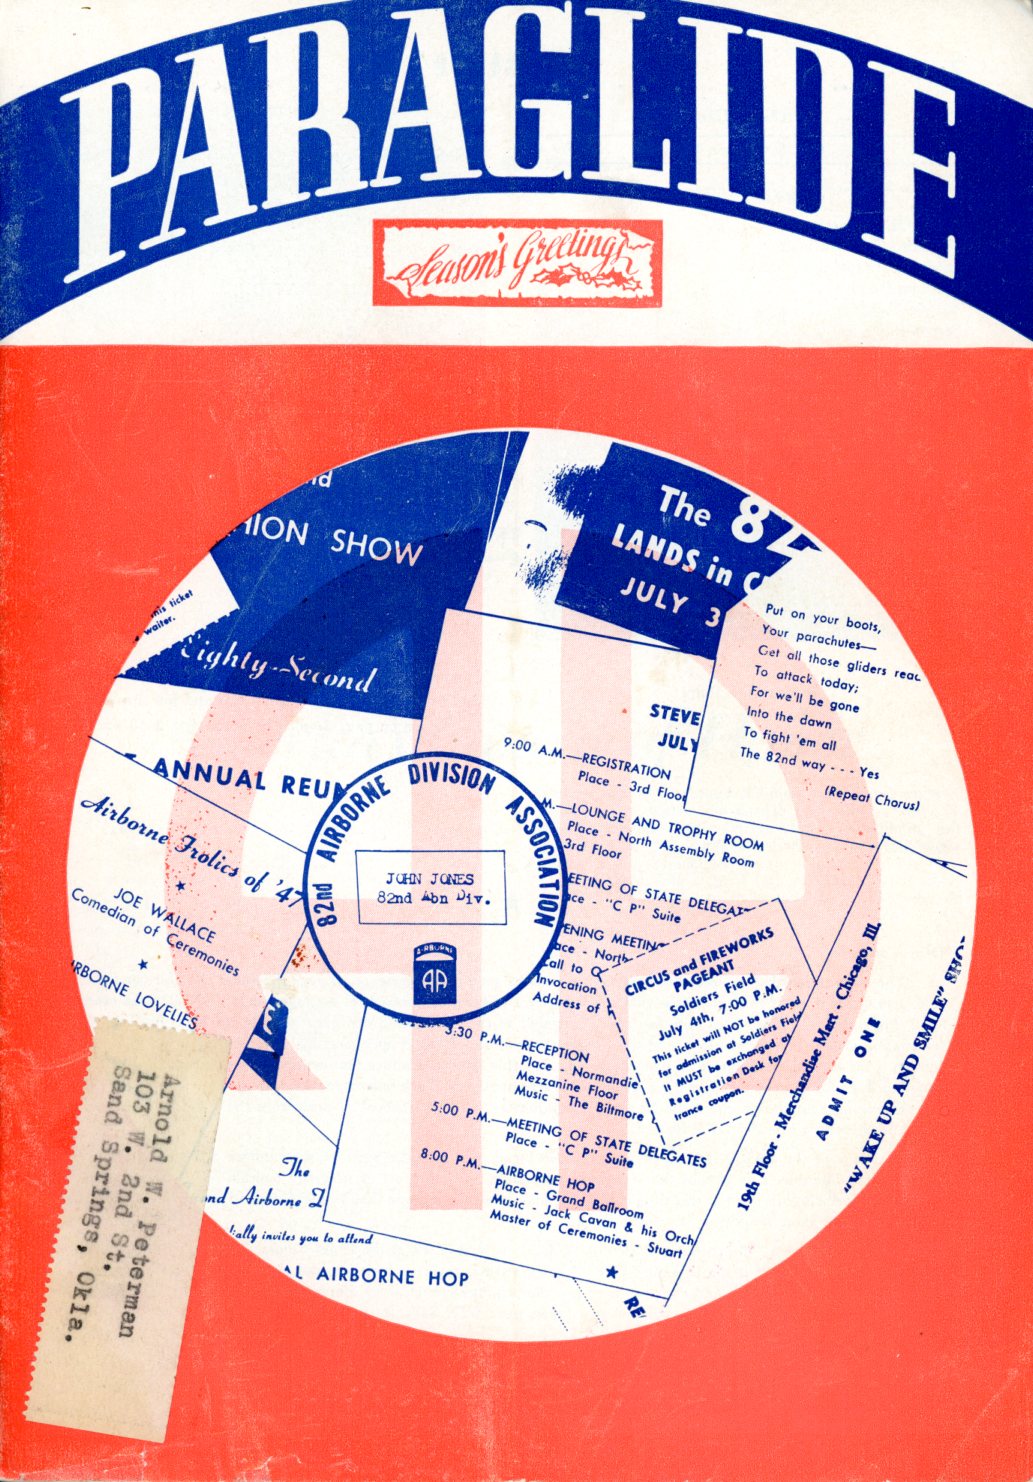 1947 copy of the "Paraglide" magazine.